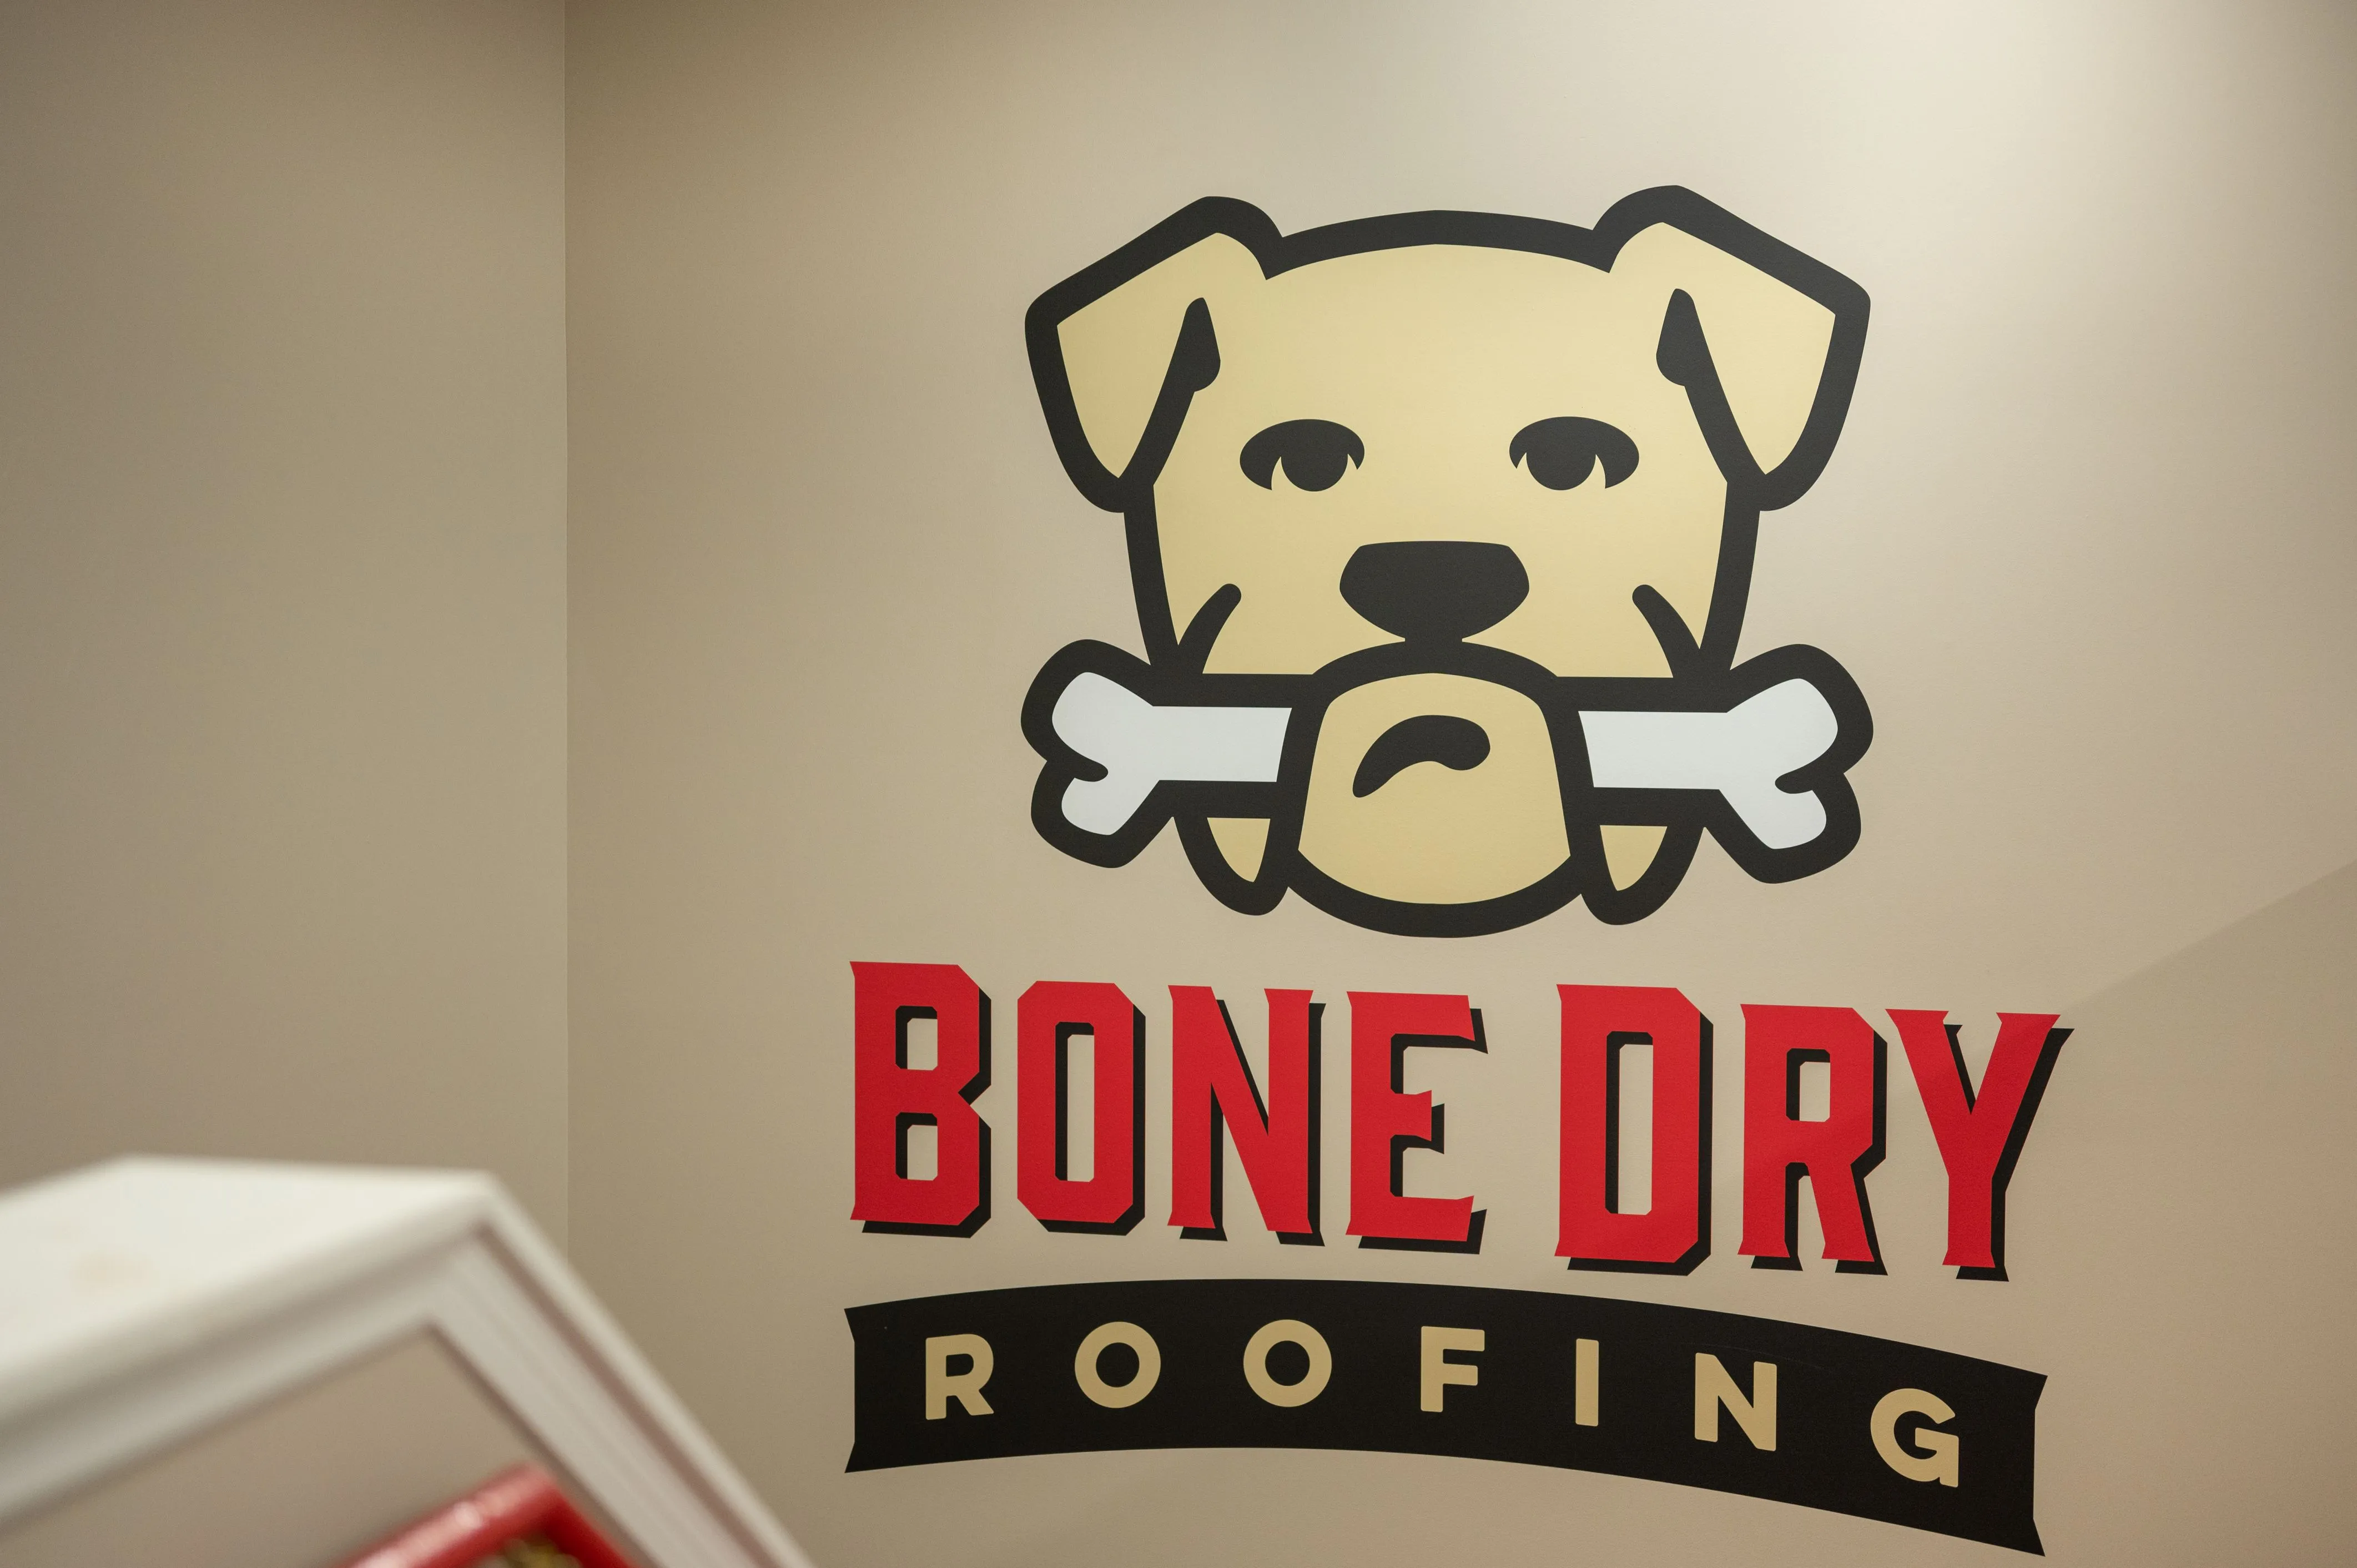 Logo of Bone Dry Roofing featuring a cartoon dog holding a bone in its mouth with stylized text.